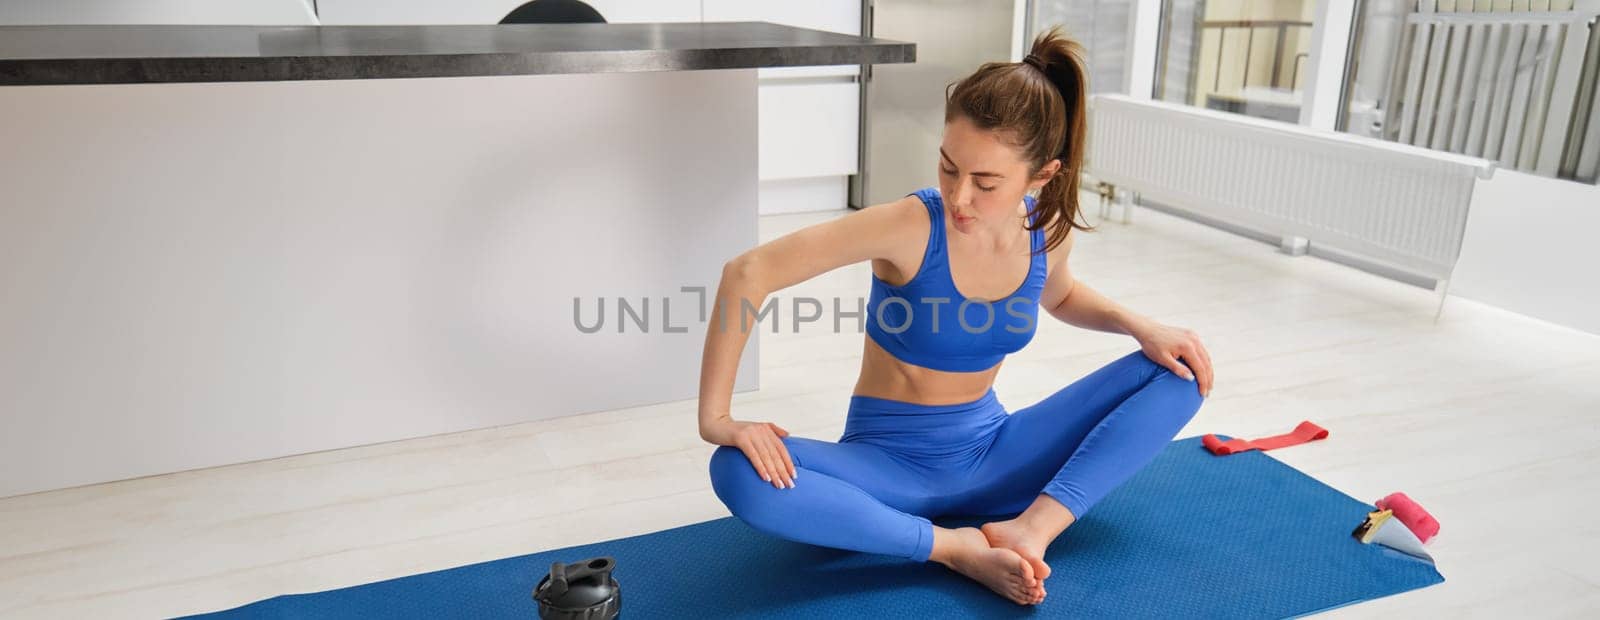 Portrait of young sportswoman, doing sports at home, workout, stretching her legs in lotus pose, smiling while training indoors. Women and lifestyle concept